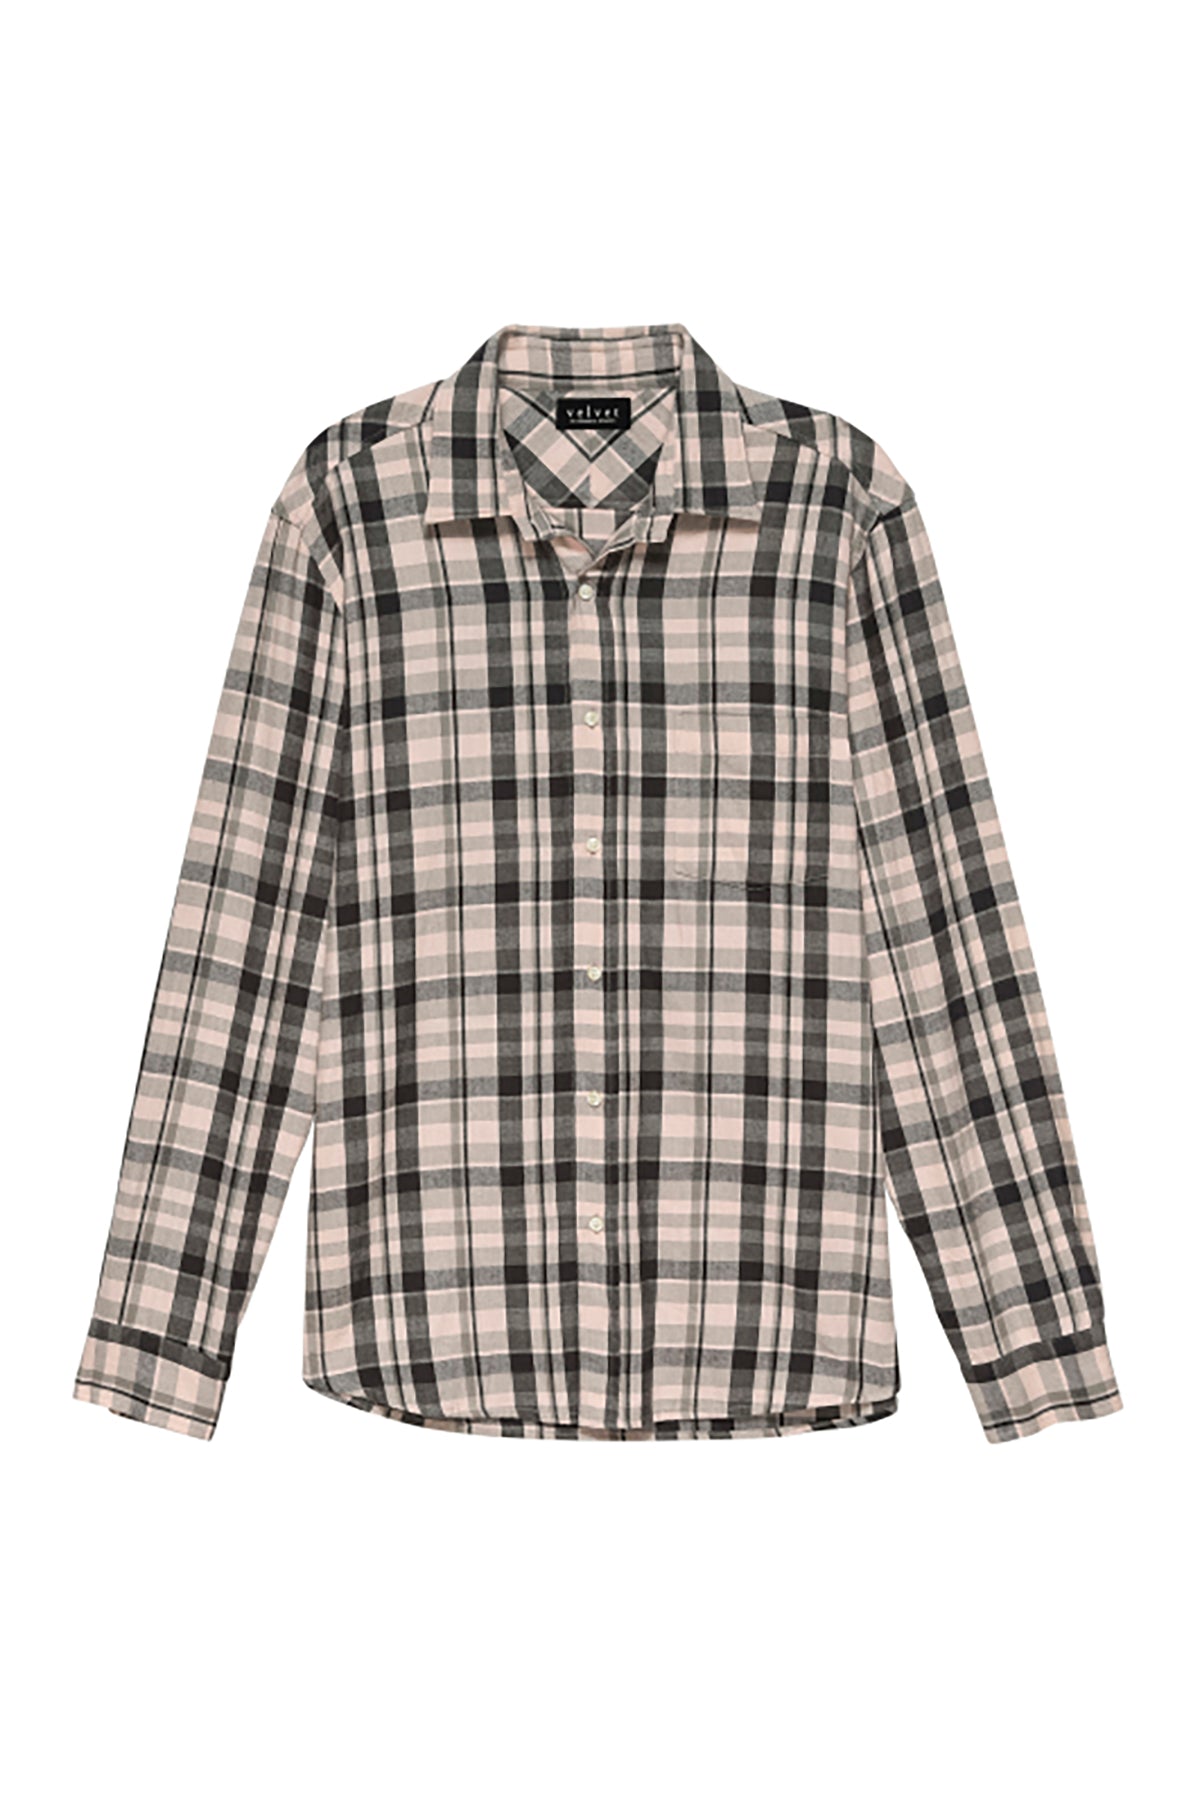   a LEONARD PLAID BUTTON-UP SHIRT in black and white by Velvet by Graham & Spencer. 